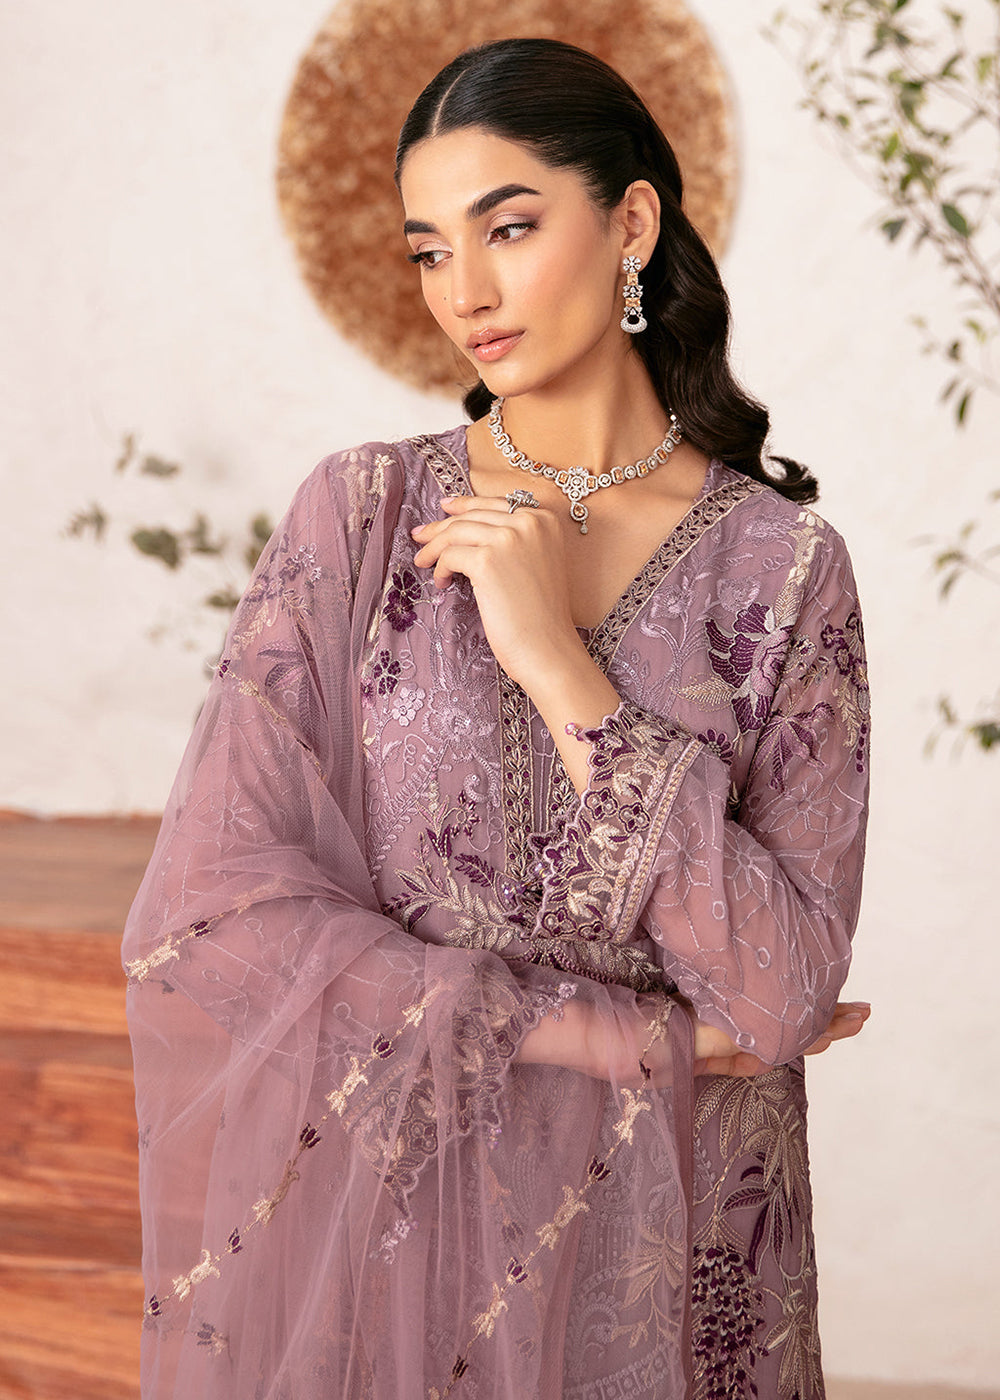 Buy Now Rangoon Chiffon Collection 24 by Ramsha | D-1208 Online at Empress in USA, UK, Canada, Germany, Italy, Dubai & Worldwide at Empress Clothing.